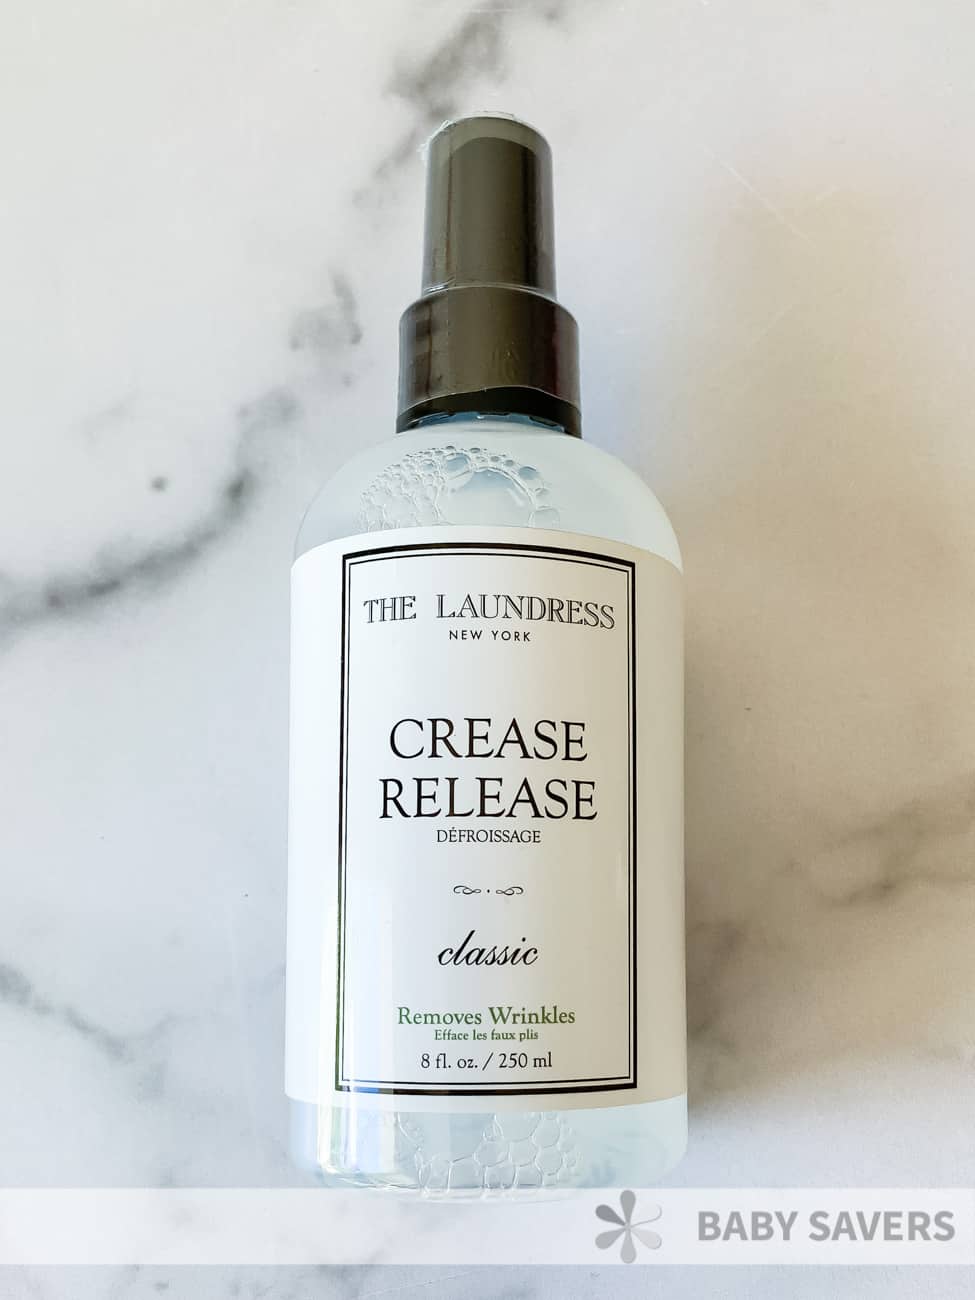 The Laundress Crease Release spray bottle with clear liquid